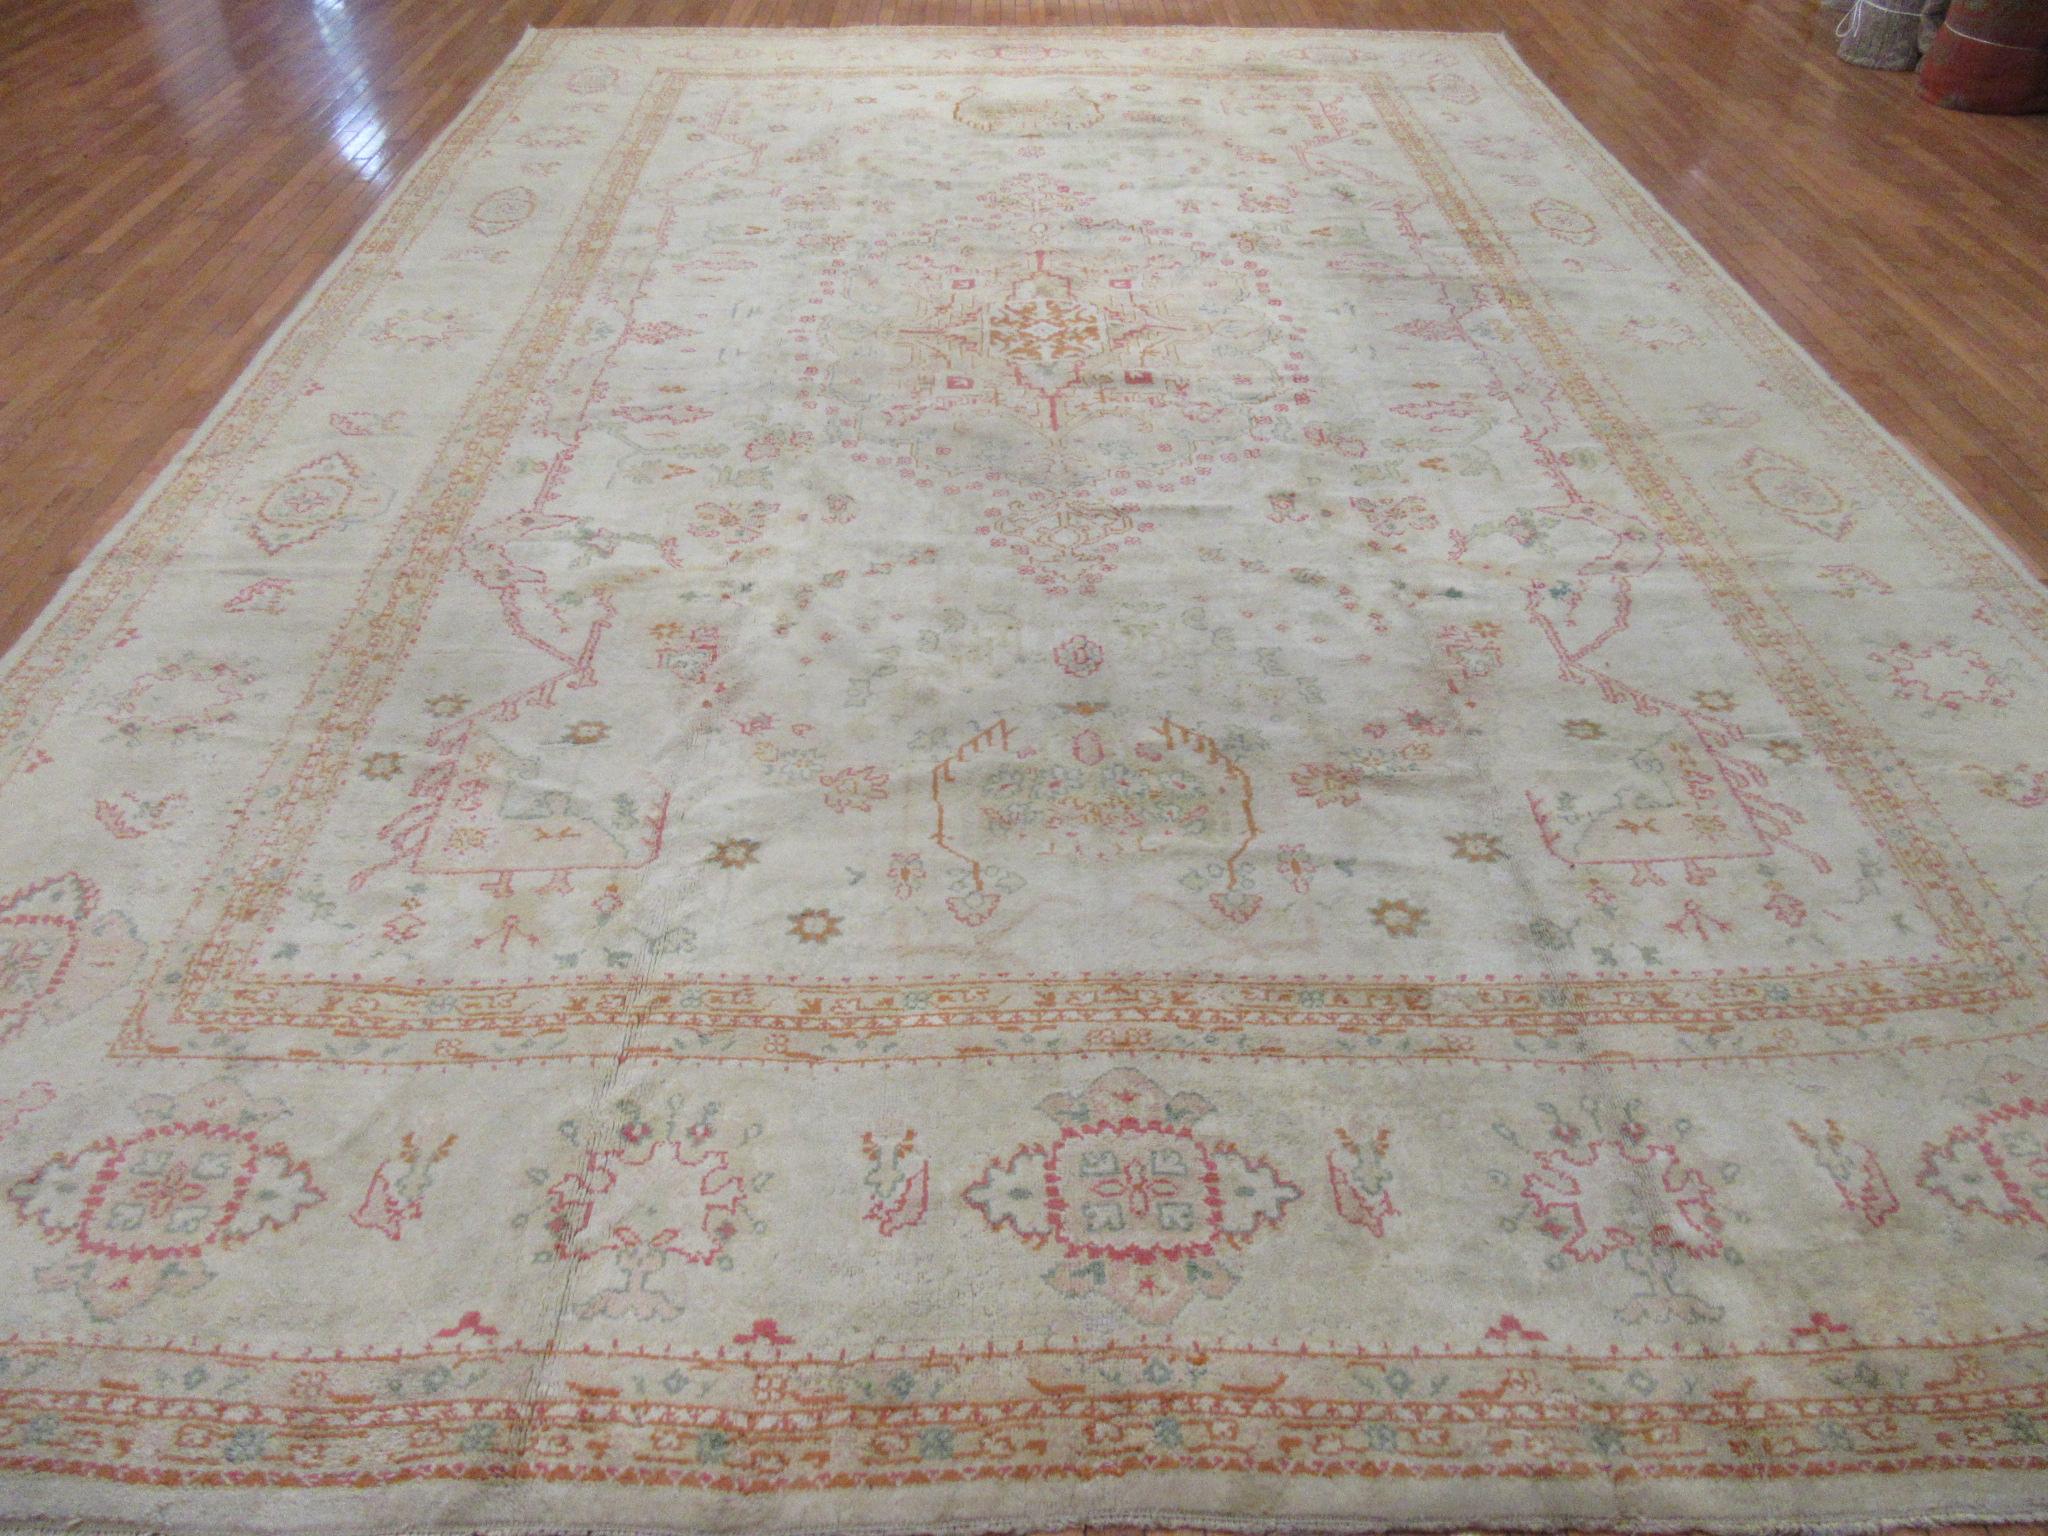 This is a beautiful antique hand-knotted Turkish Oushak rug. It has an exquisite formal design made with all wool colored is all natural dyes. The rug measures 11' 9'' x 18'. It is in great condition.
 